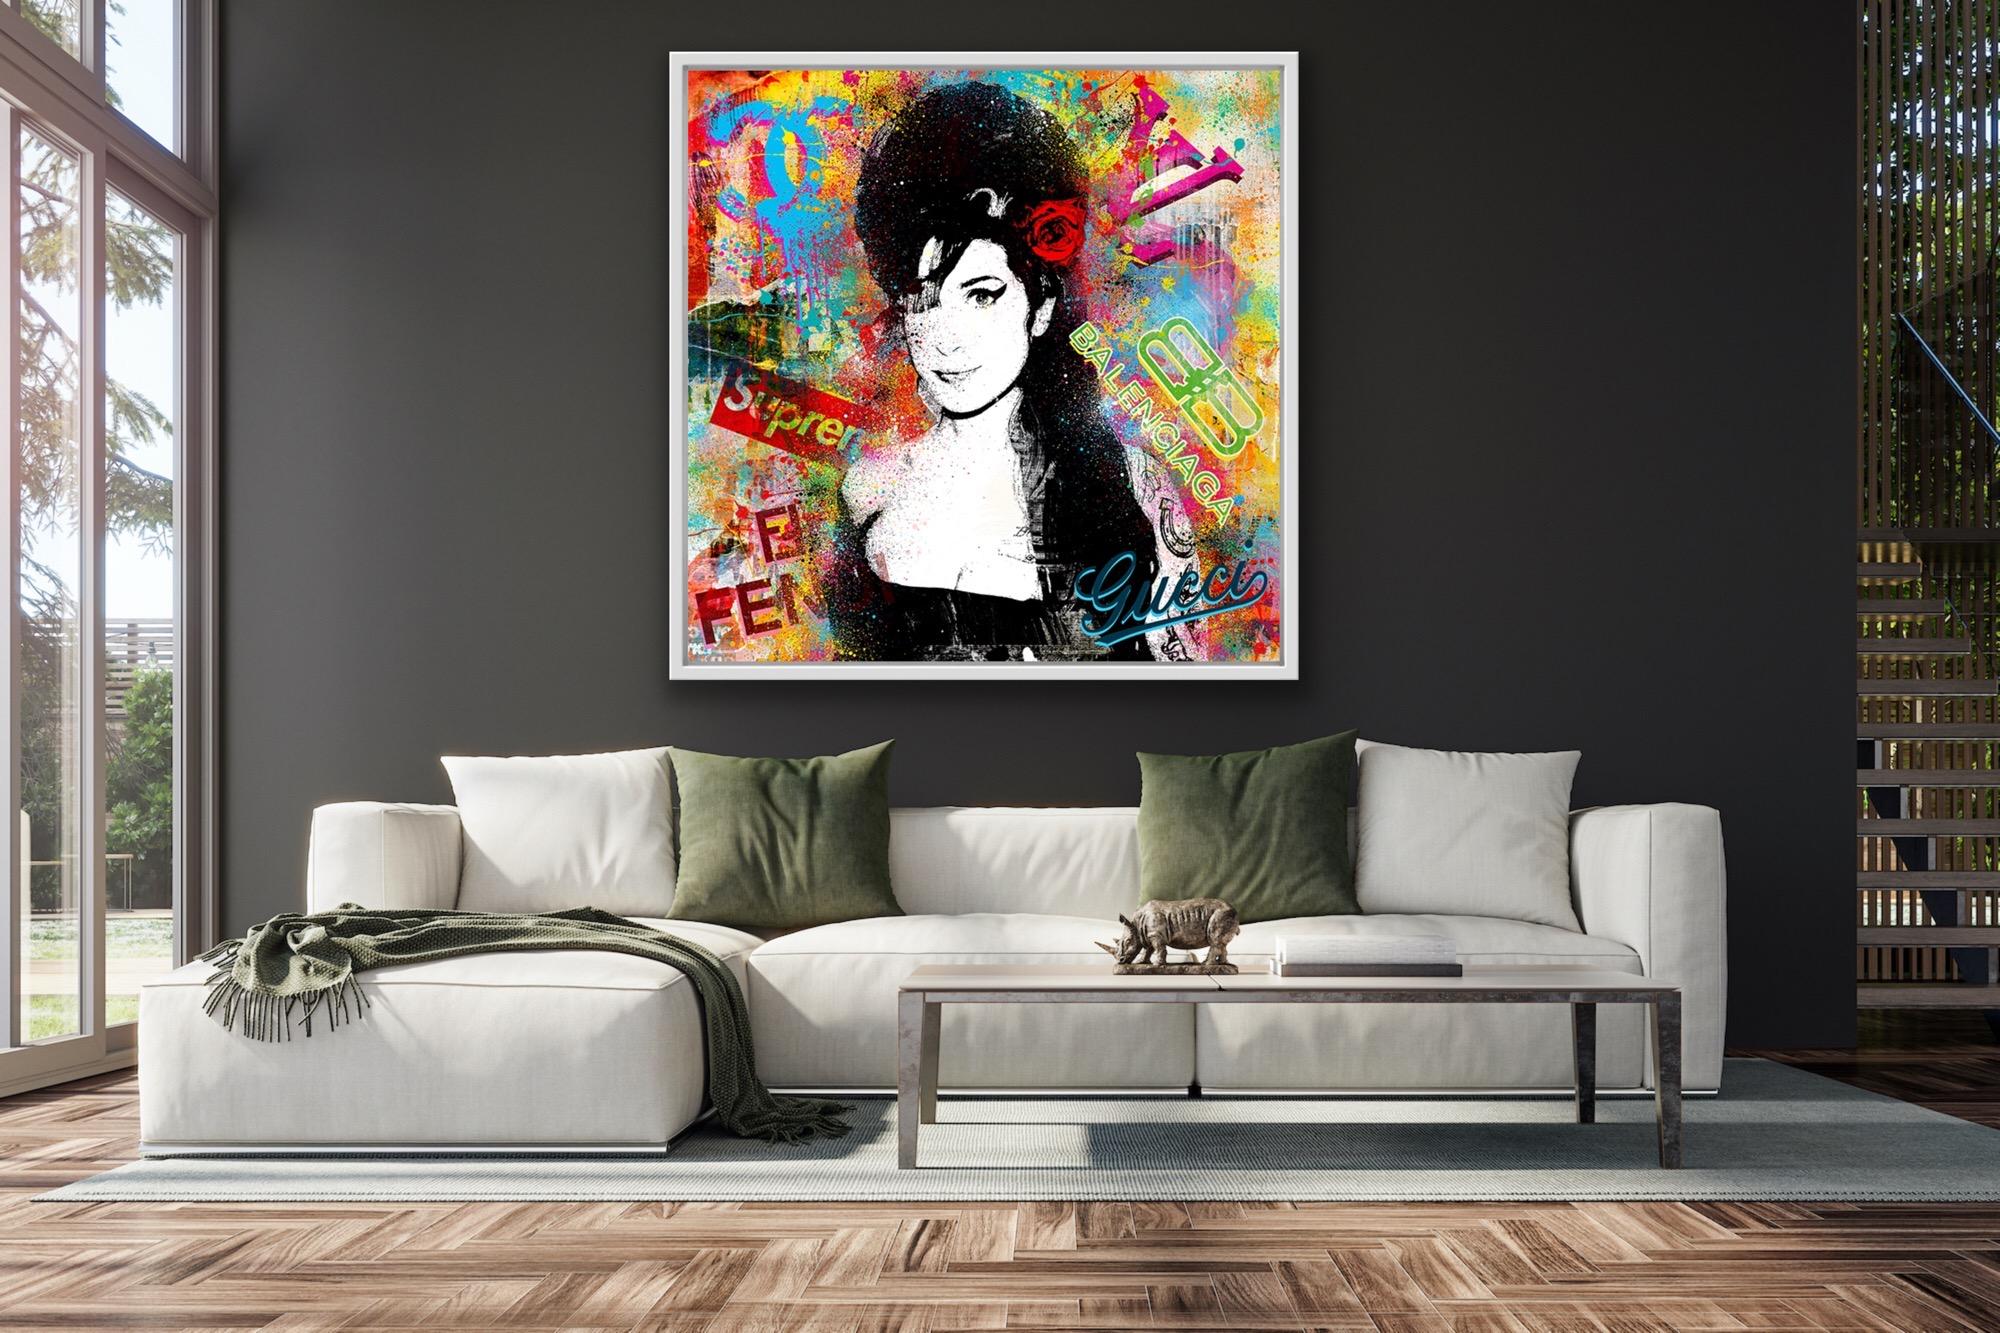 Agent X has created a bright and brilliant mash-up of iconic Pop Art aesthetics and digital collage techniques. Agent X intercuts Pop art imagery with panels of poppy pattern, colour, and with multicoloured paint splats and drips. He creates a